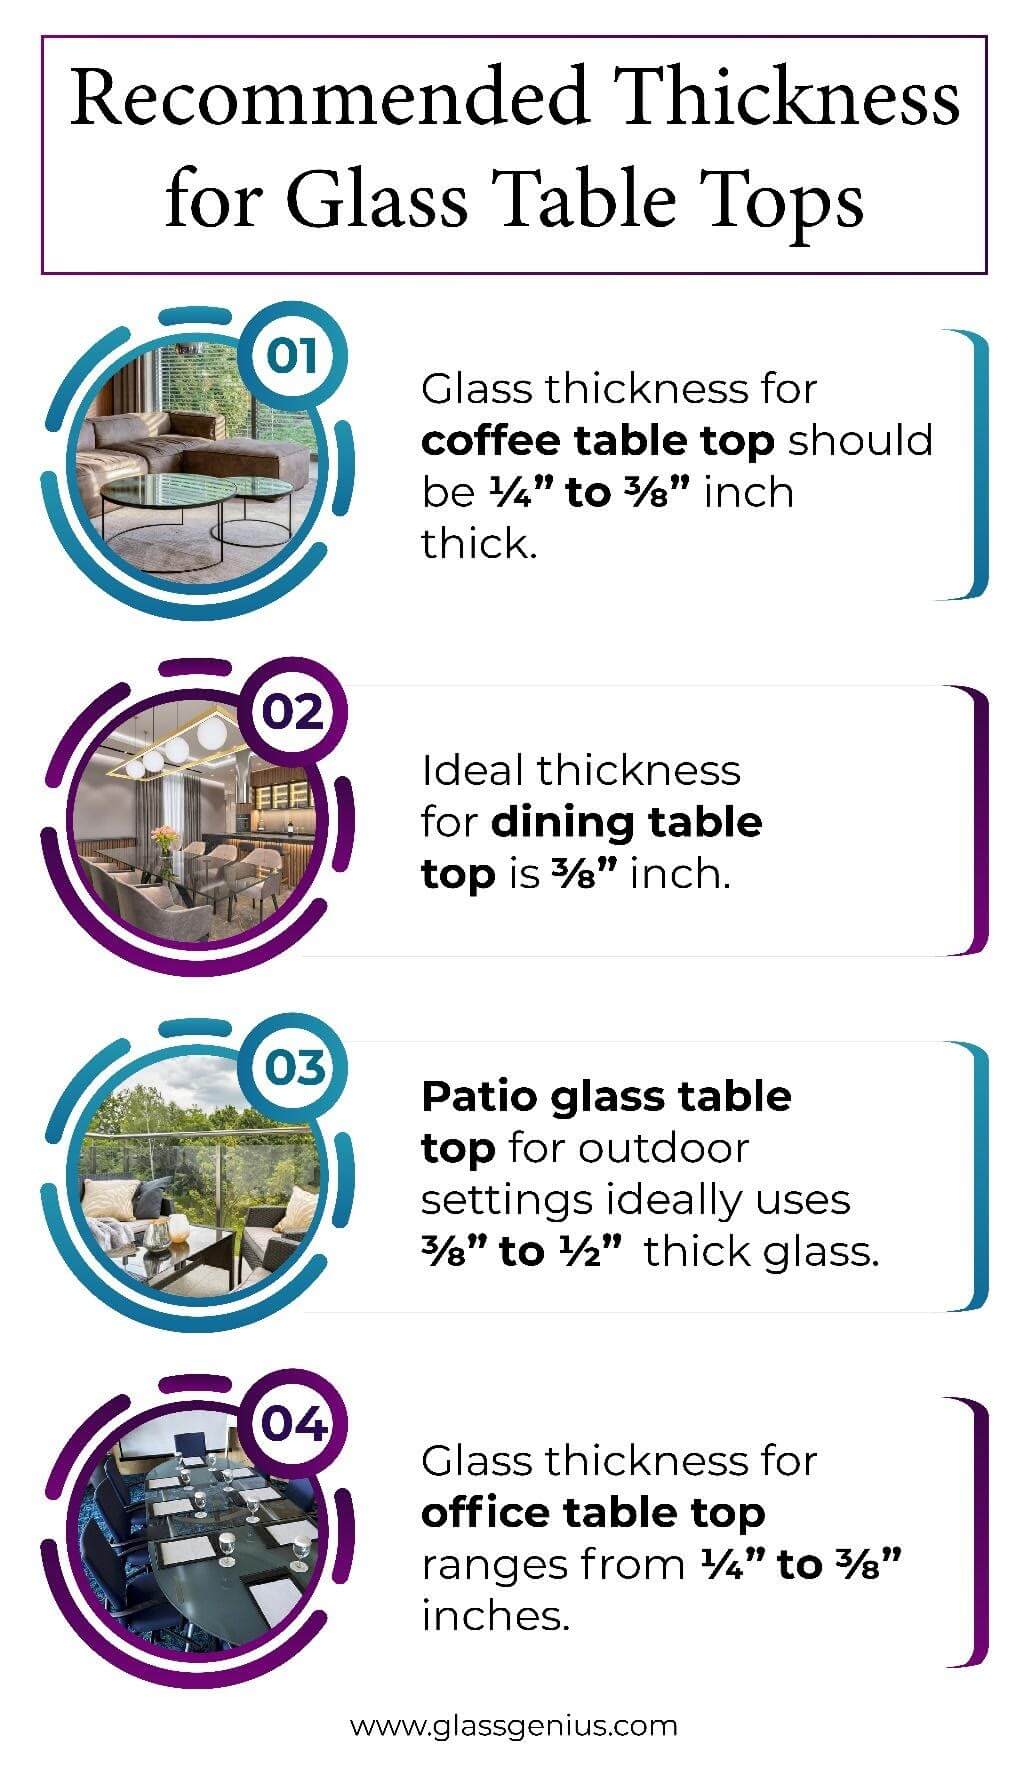 https://www.glassgenius.com/blog/wp-content/uploads/2021/10/recommended-thickness-for-glass-table-tops.jpg